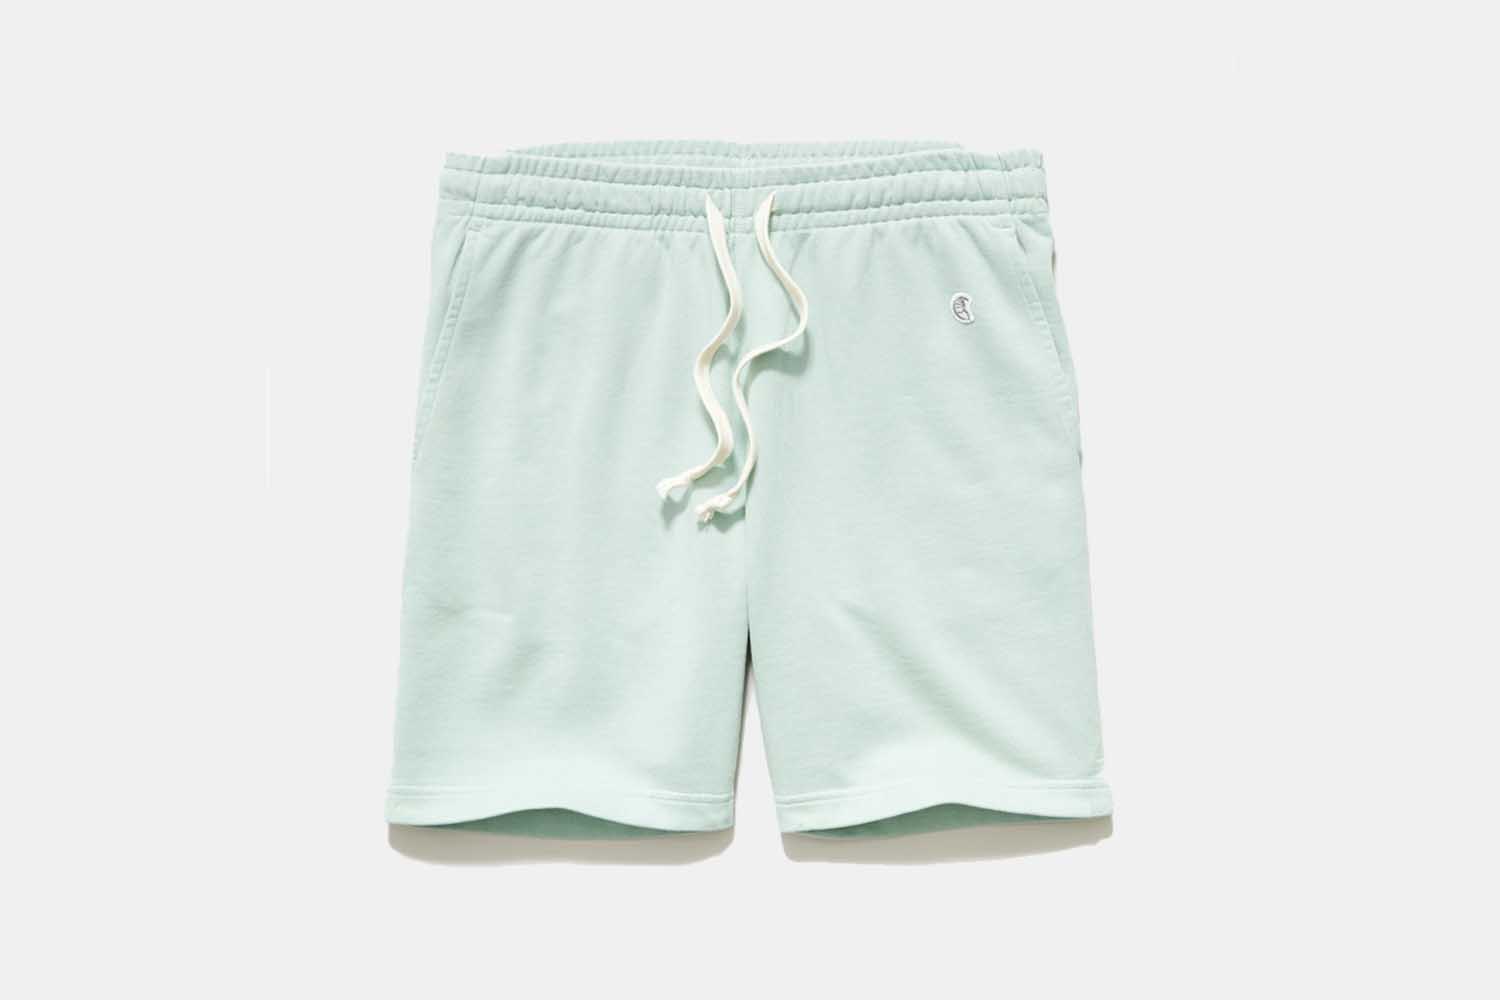 Deal: These Pistachio-Colored Todd Snyder x Champion Sweat Shorts Are on Sale